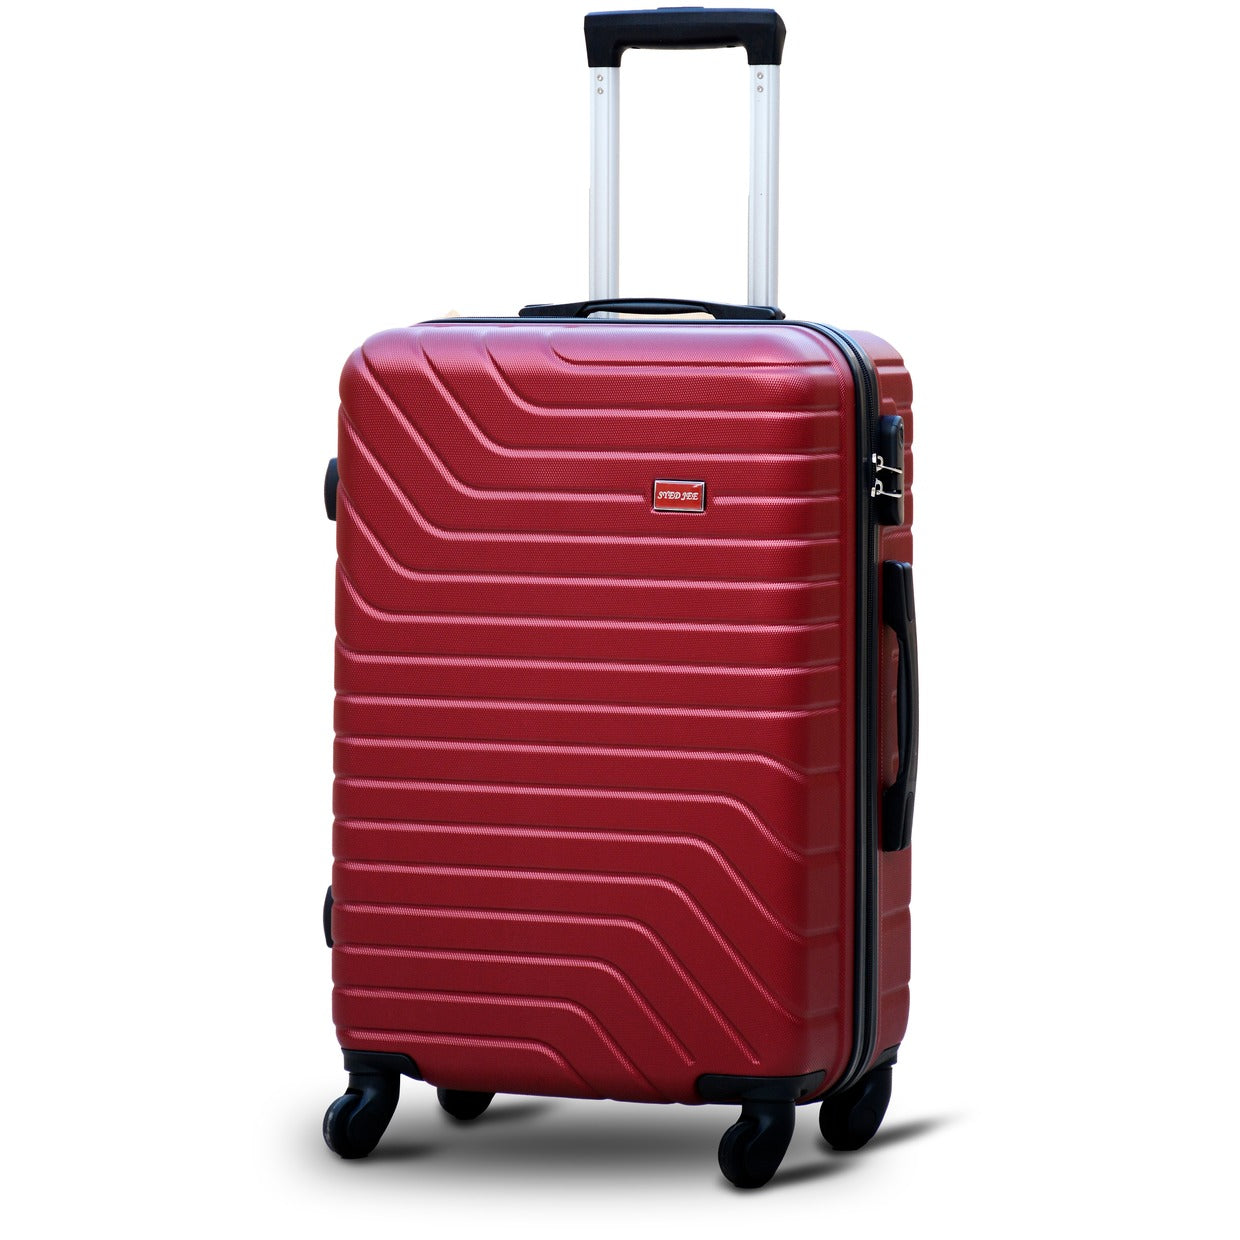 28" Red Colour SJ ABS Luggage Lightweight Hard Case Trolley Bag Zaappy.com